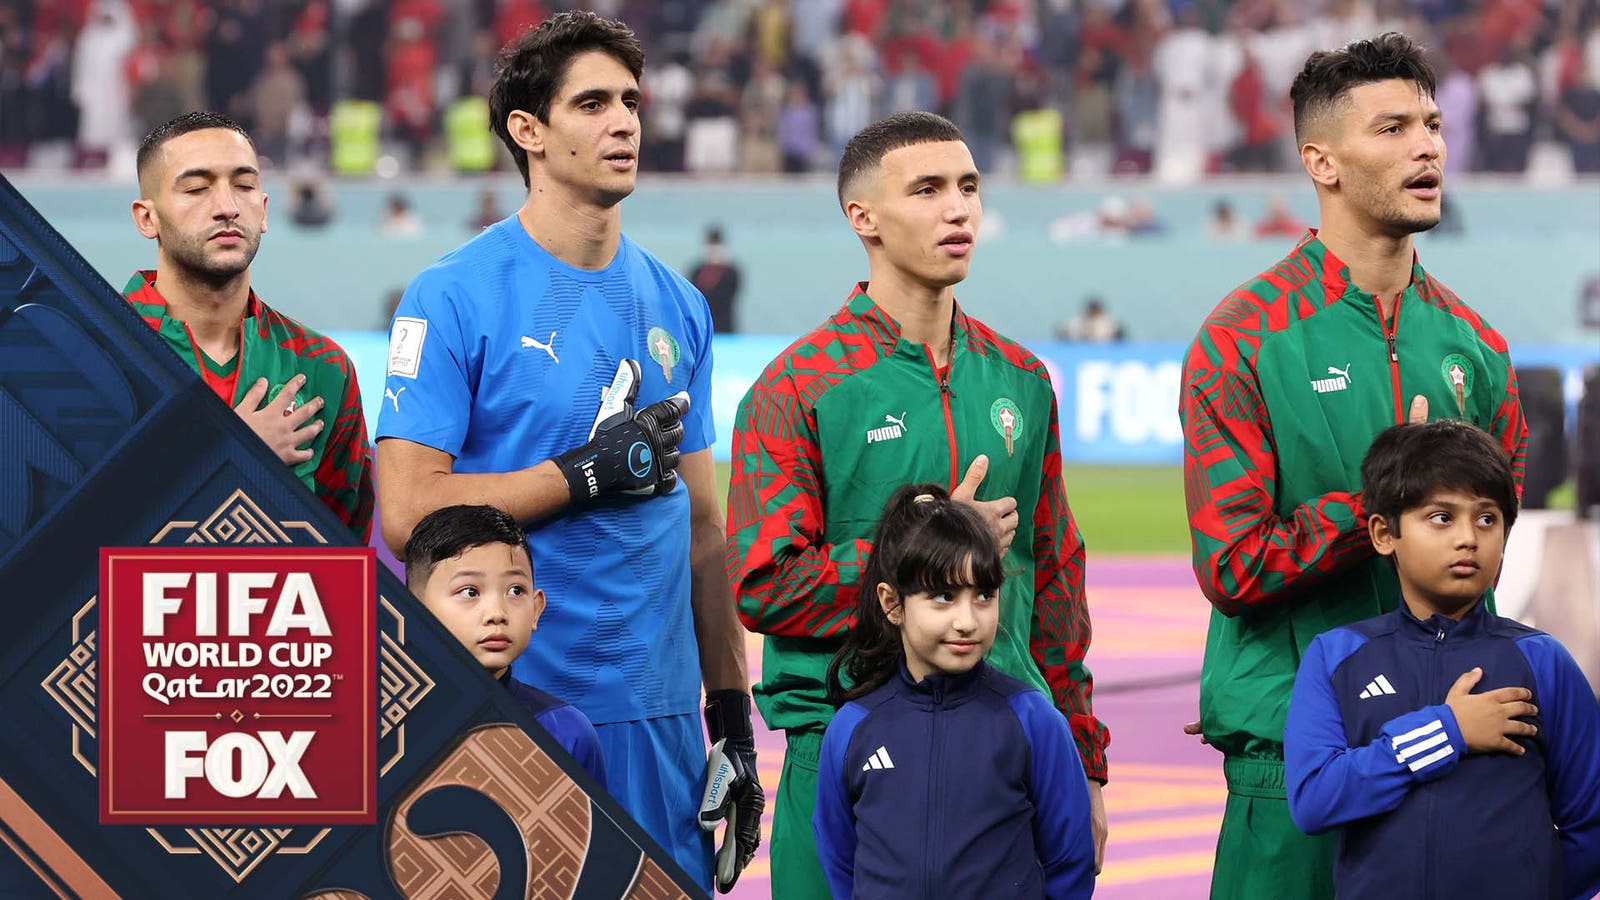 Croatia and Morocco's walk-outs and national anthems ahead of third place game